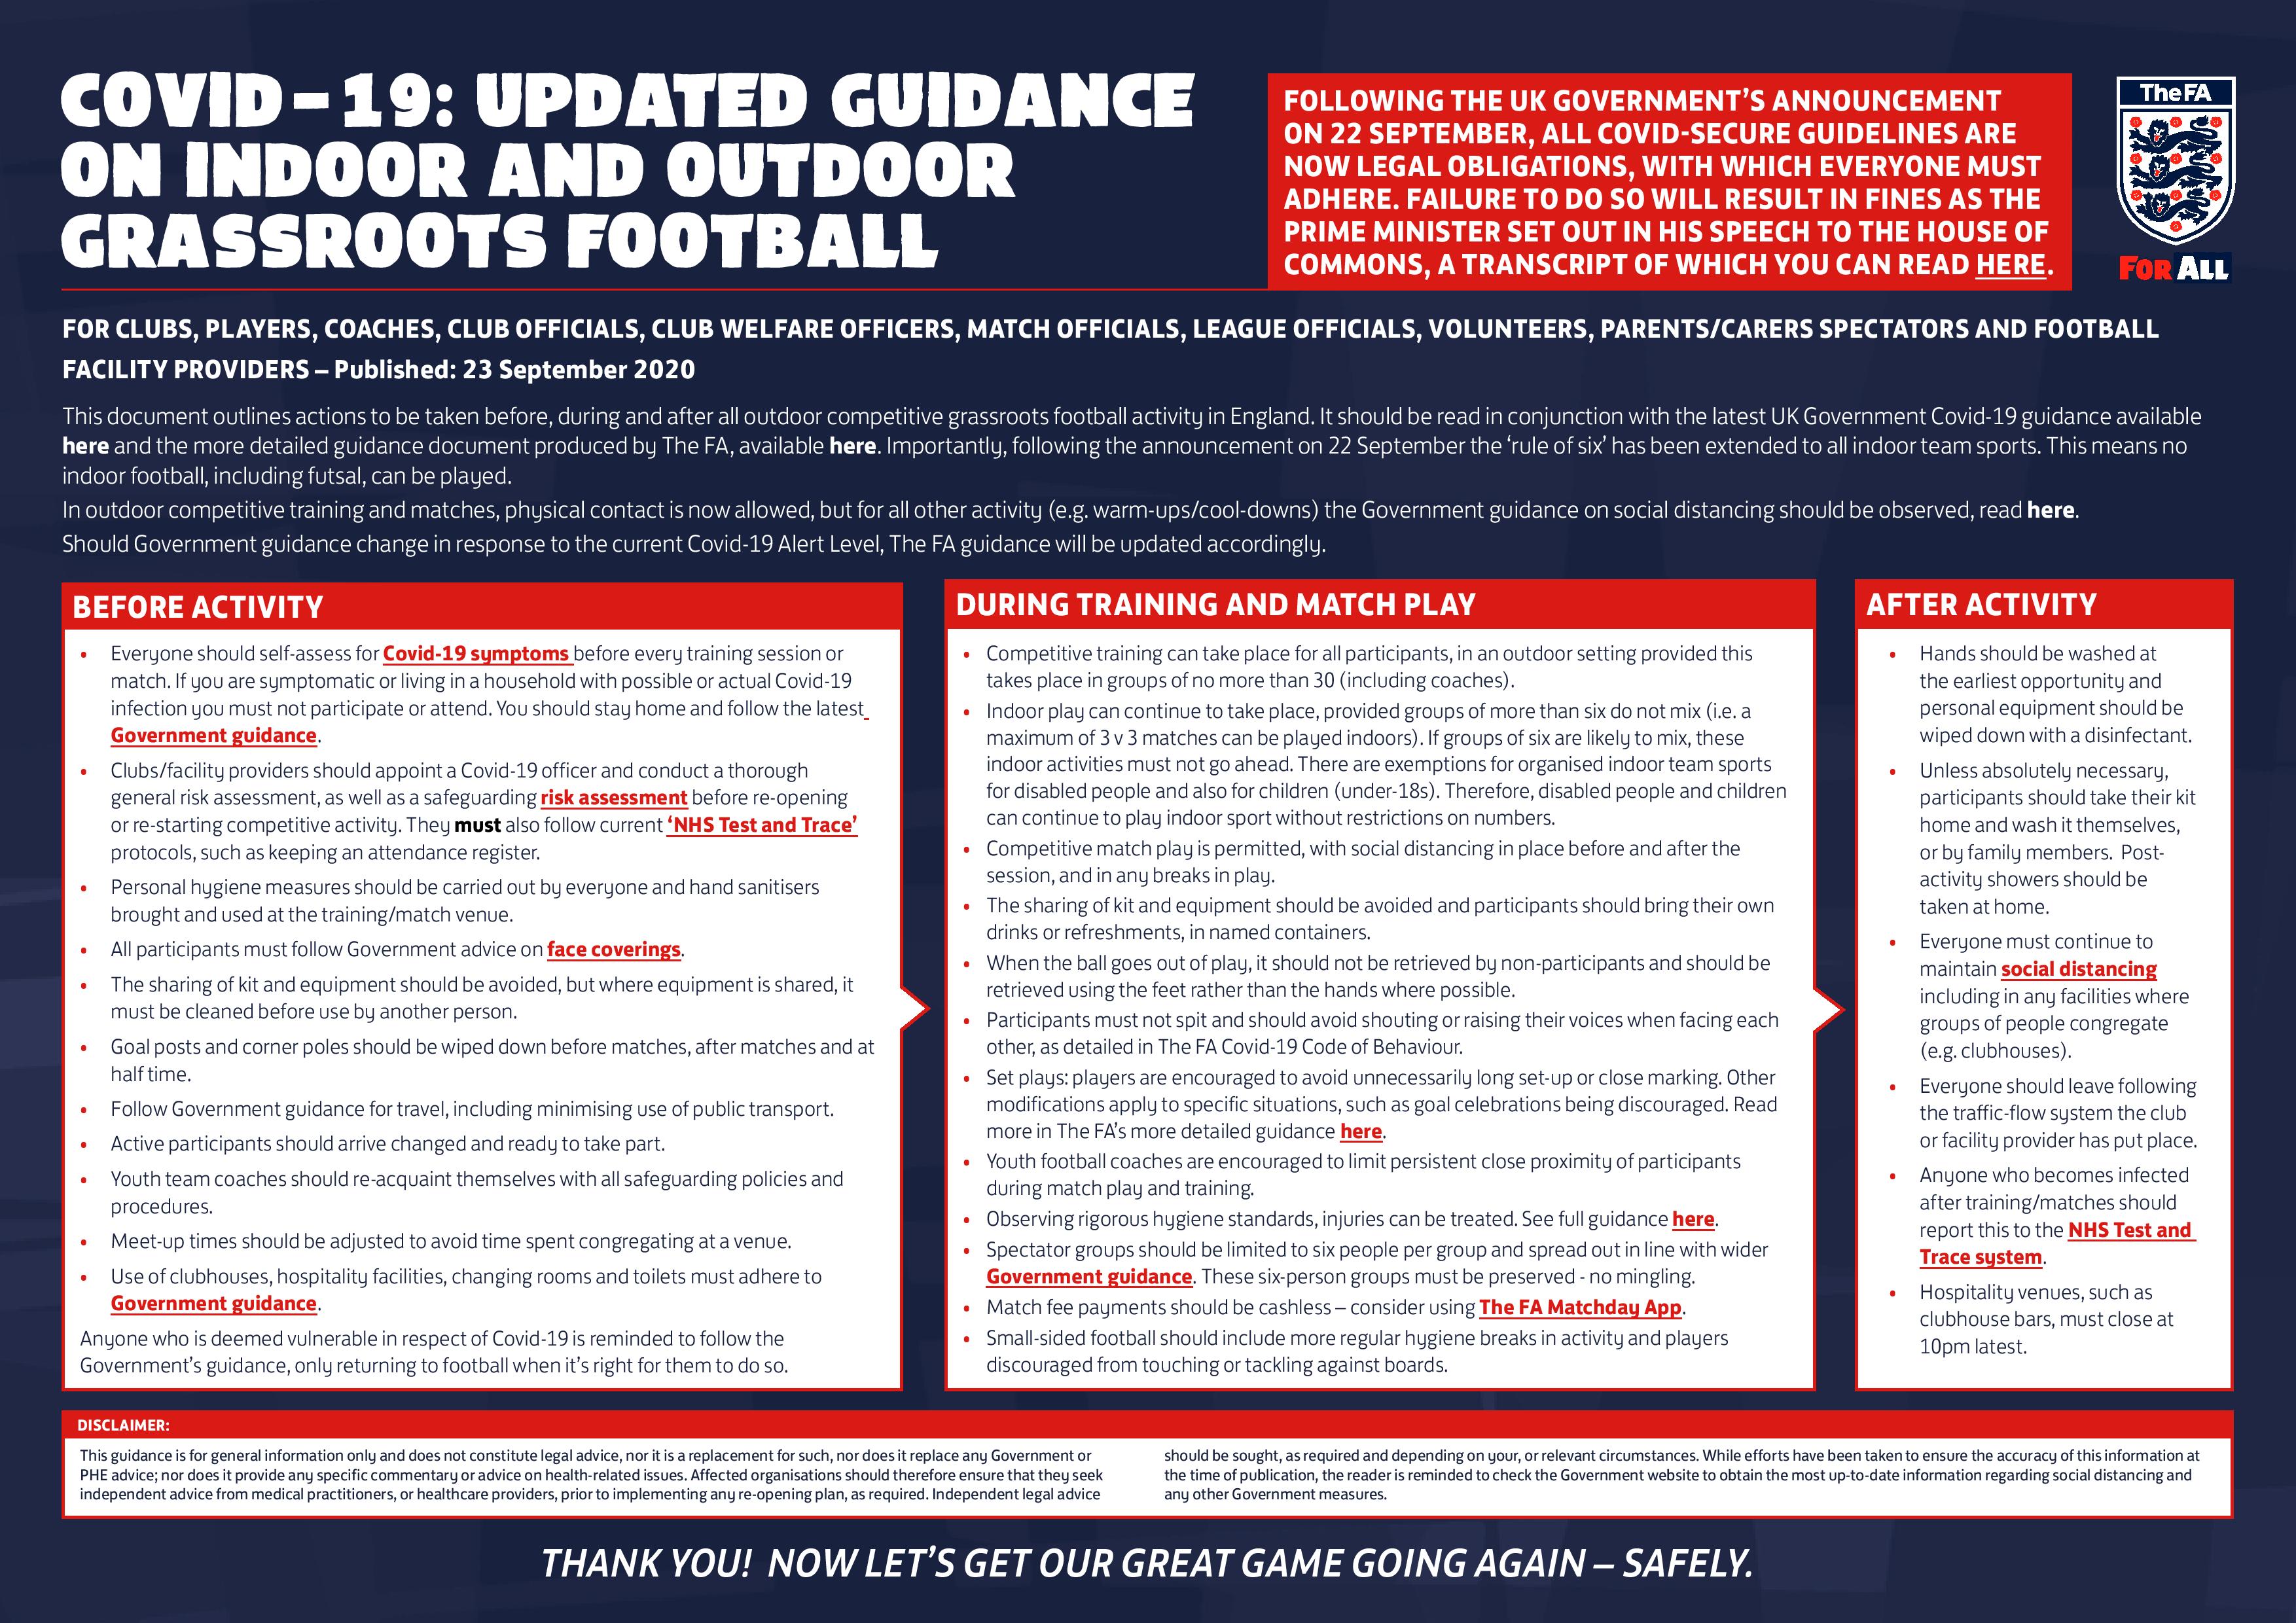 Guidance on Indoor and Outdoor Football Summary (23rd September)